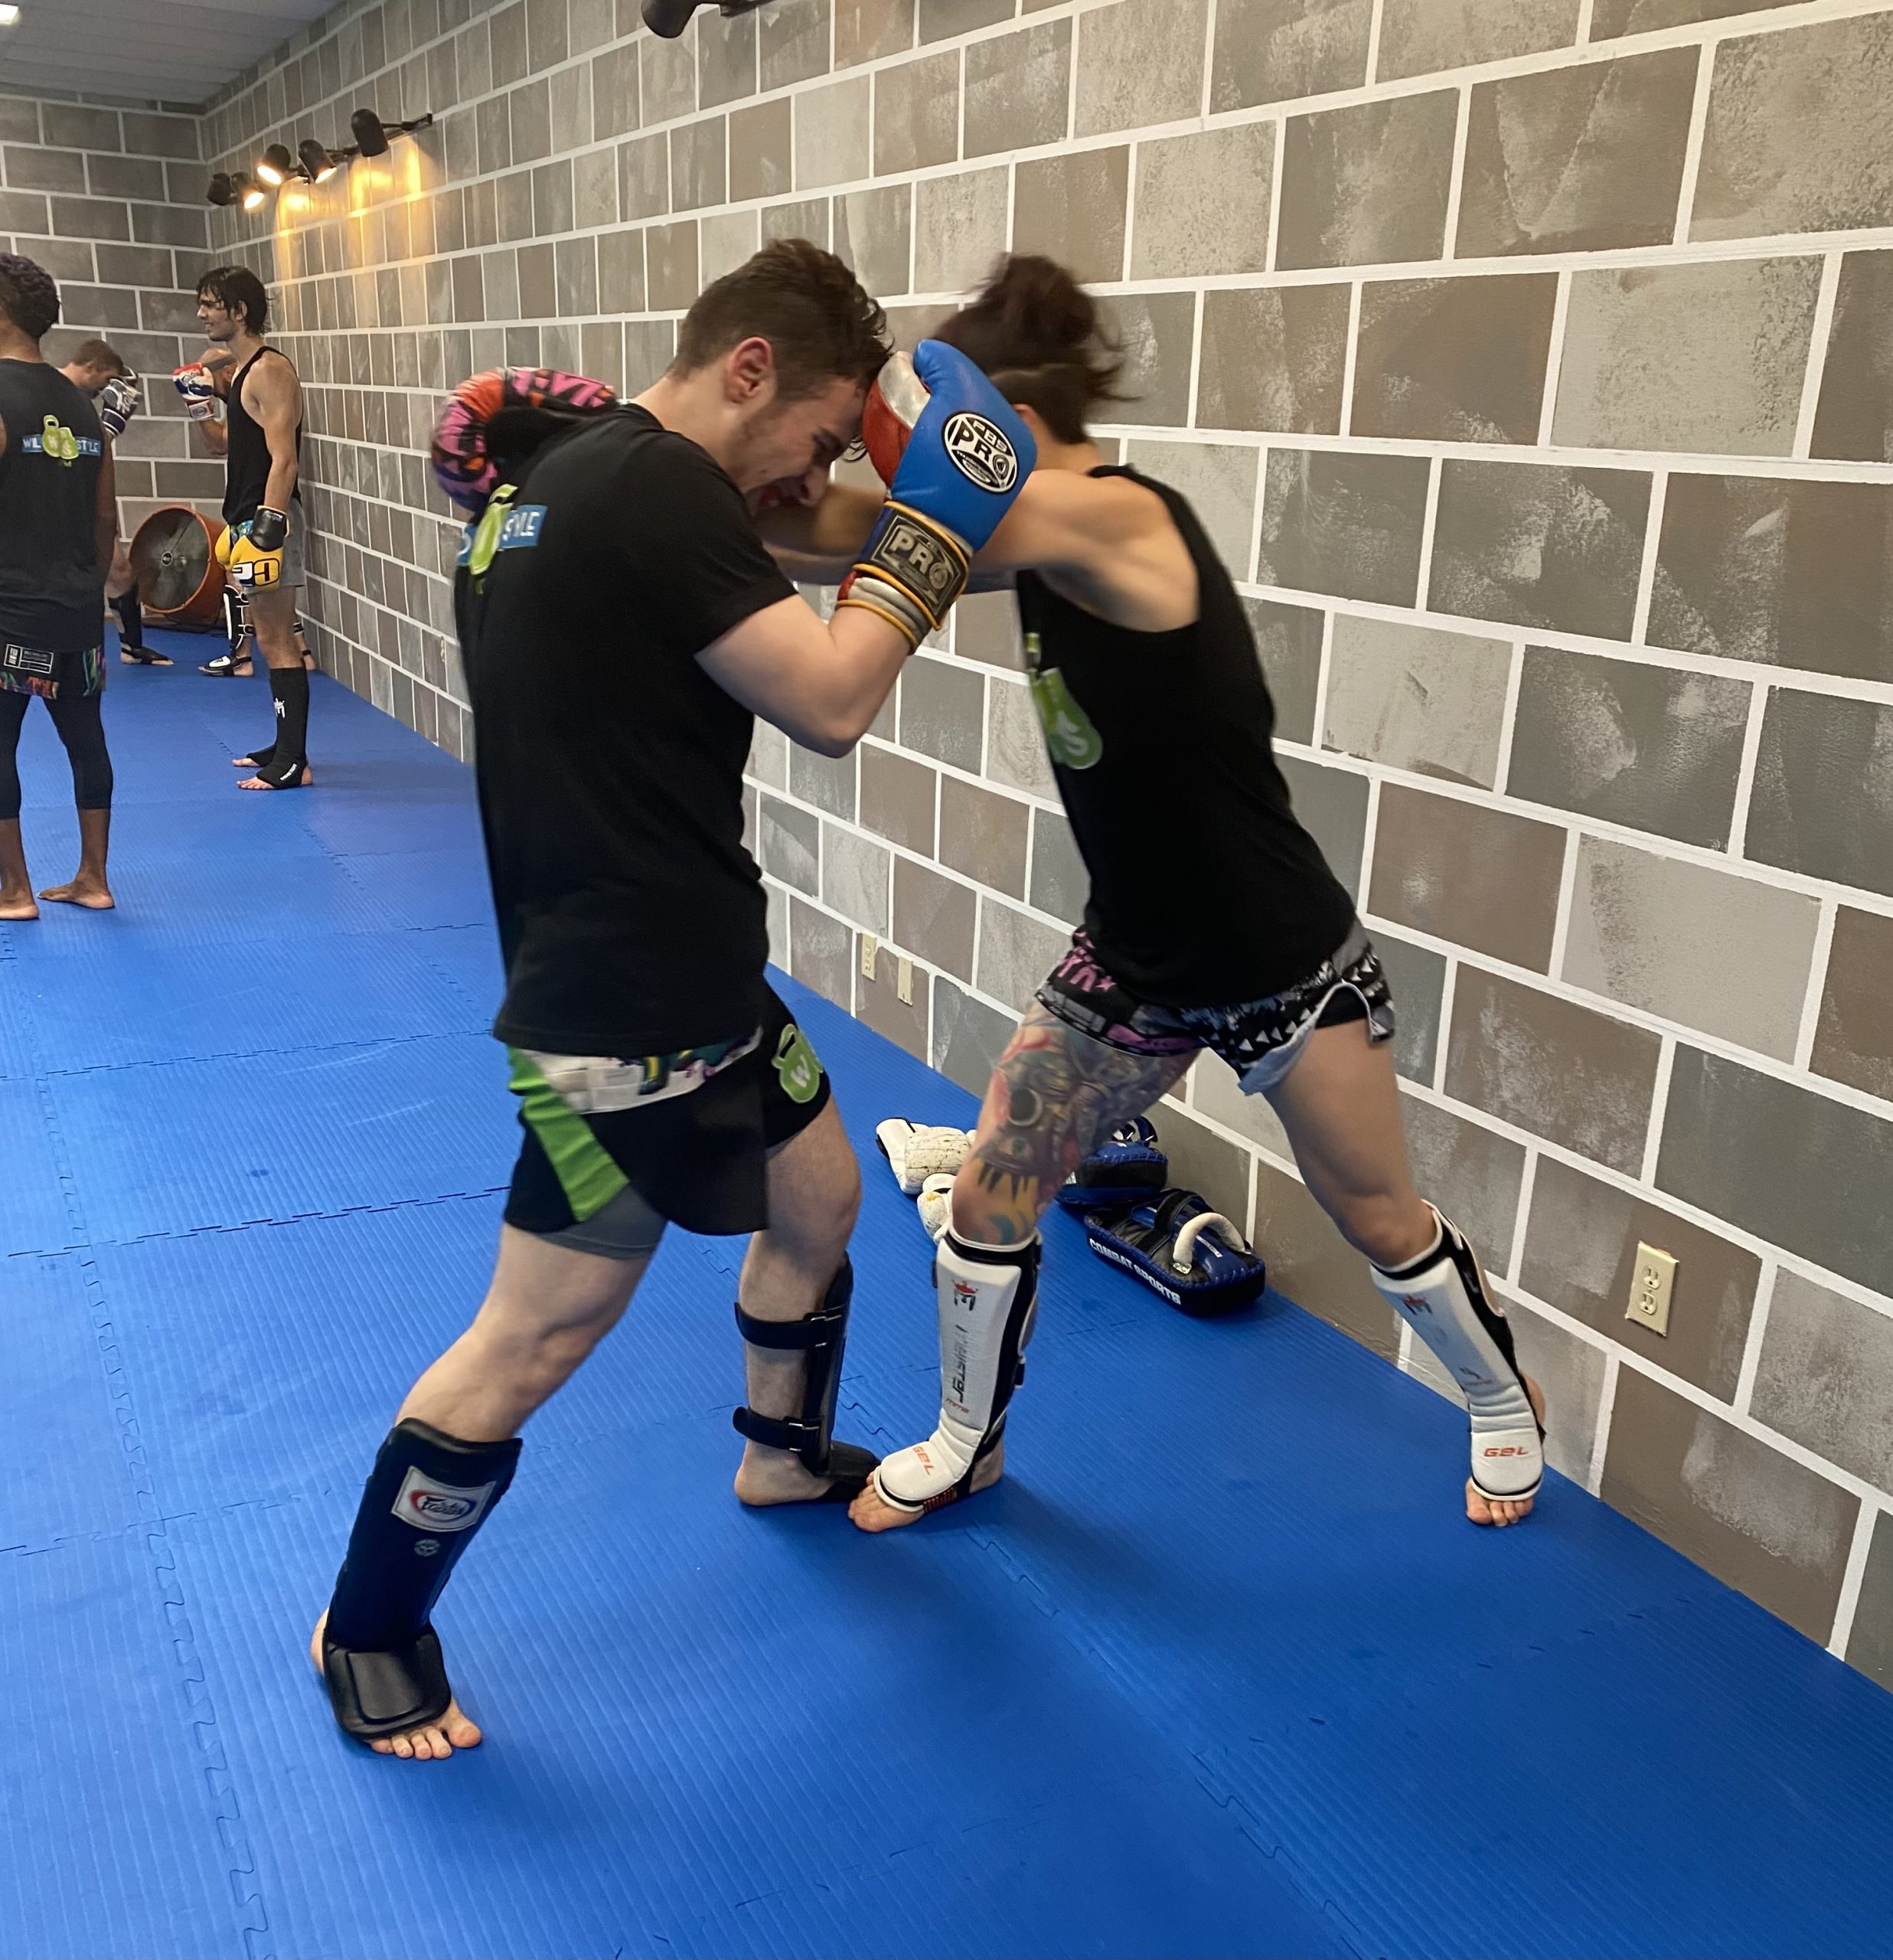 Learn How to Safely Grapple and Spar with MMA Training Sessions